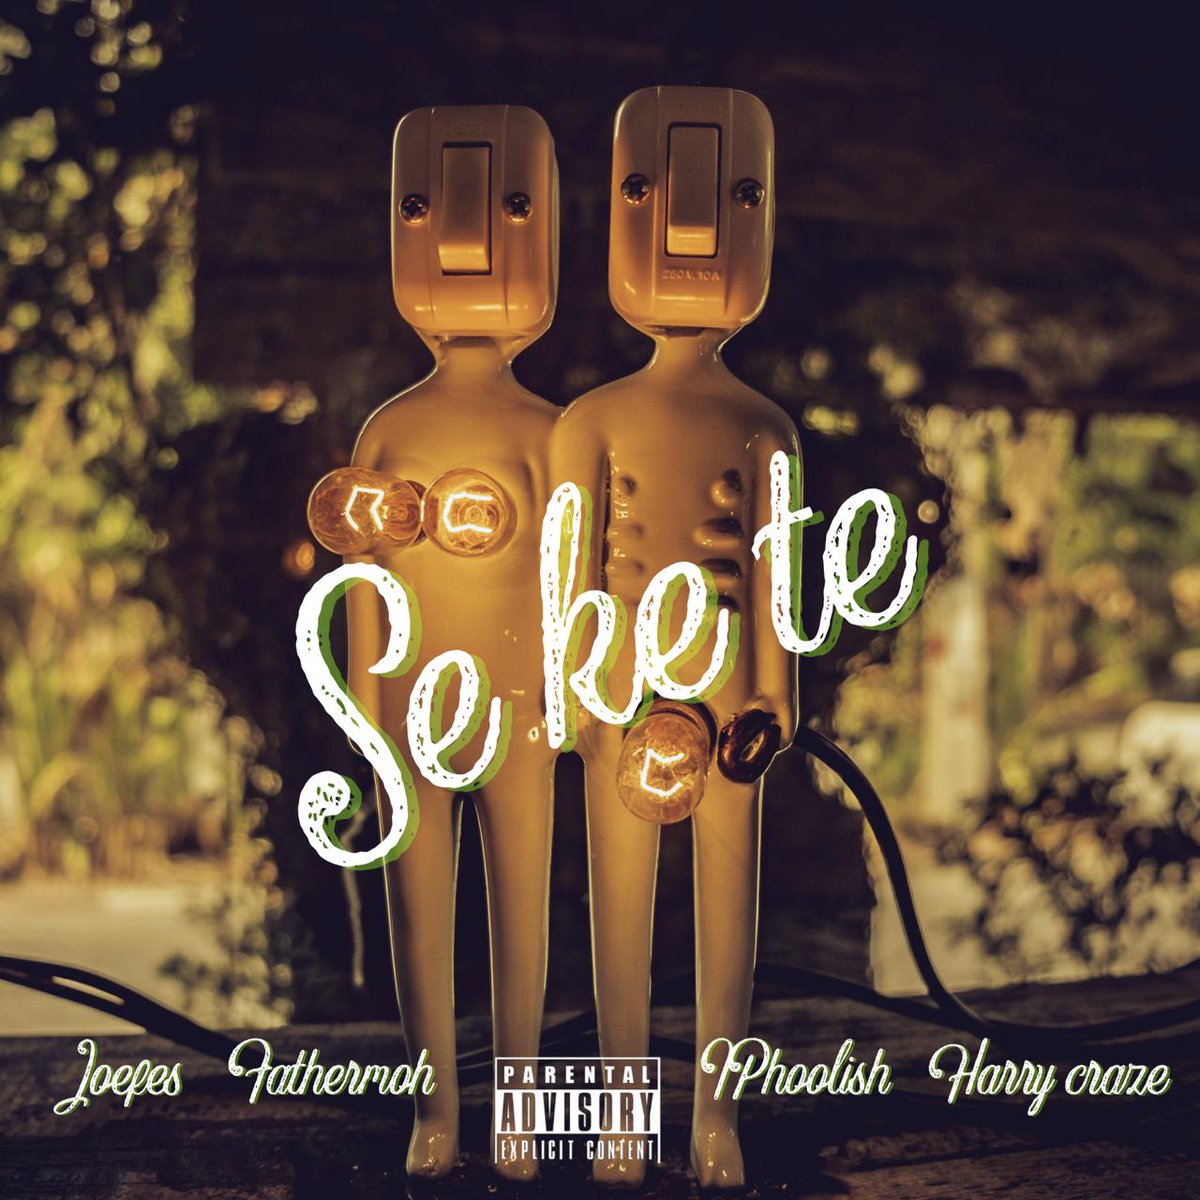 Brand New release this week.

Joefes has officially released his awaited sound 'Sekete' ft Mbuzi Gang and Harrycraze on youtube. 

Head over to youtube and catch a vibe
#EveMungai #NewMusicAlert #Sekete #lethalcompany #Mbuzigang #whotfdidimarry #TheMommyClub